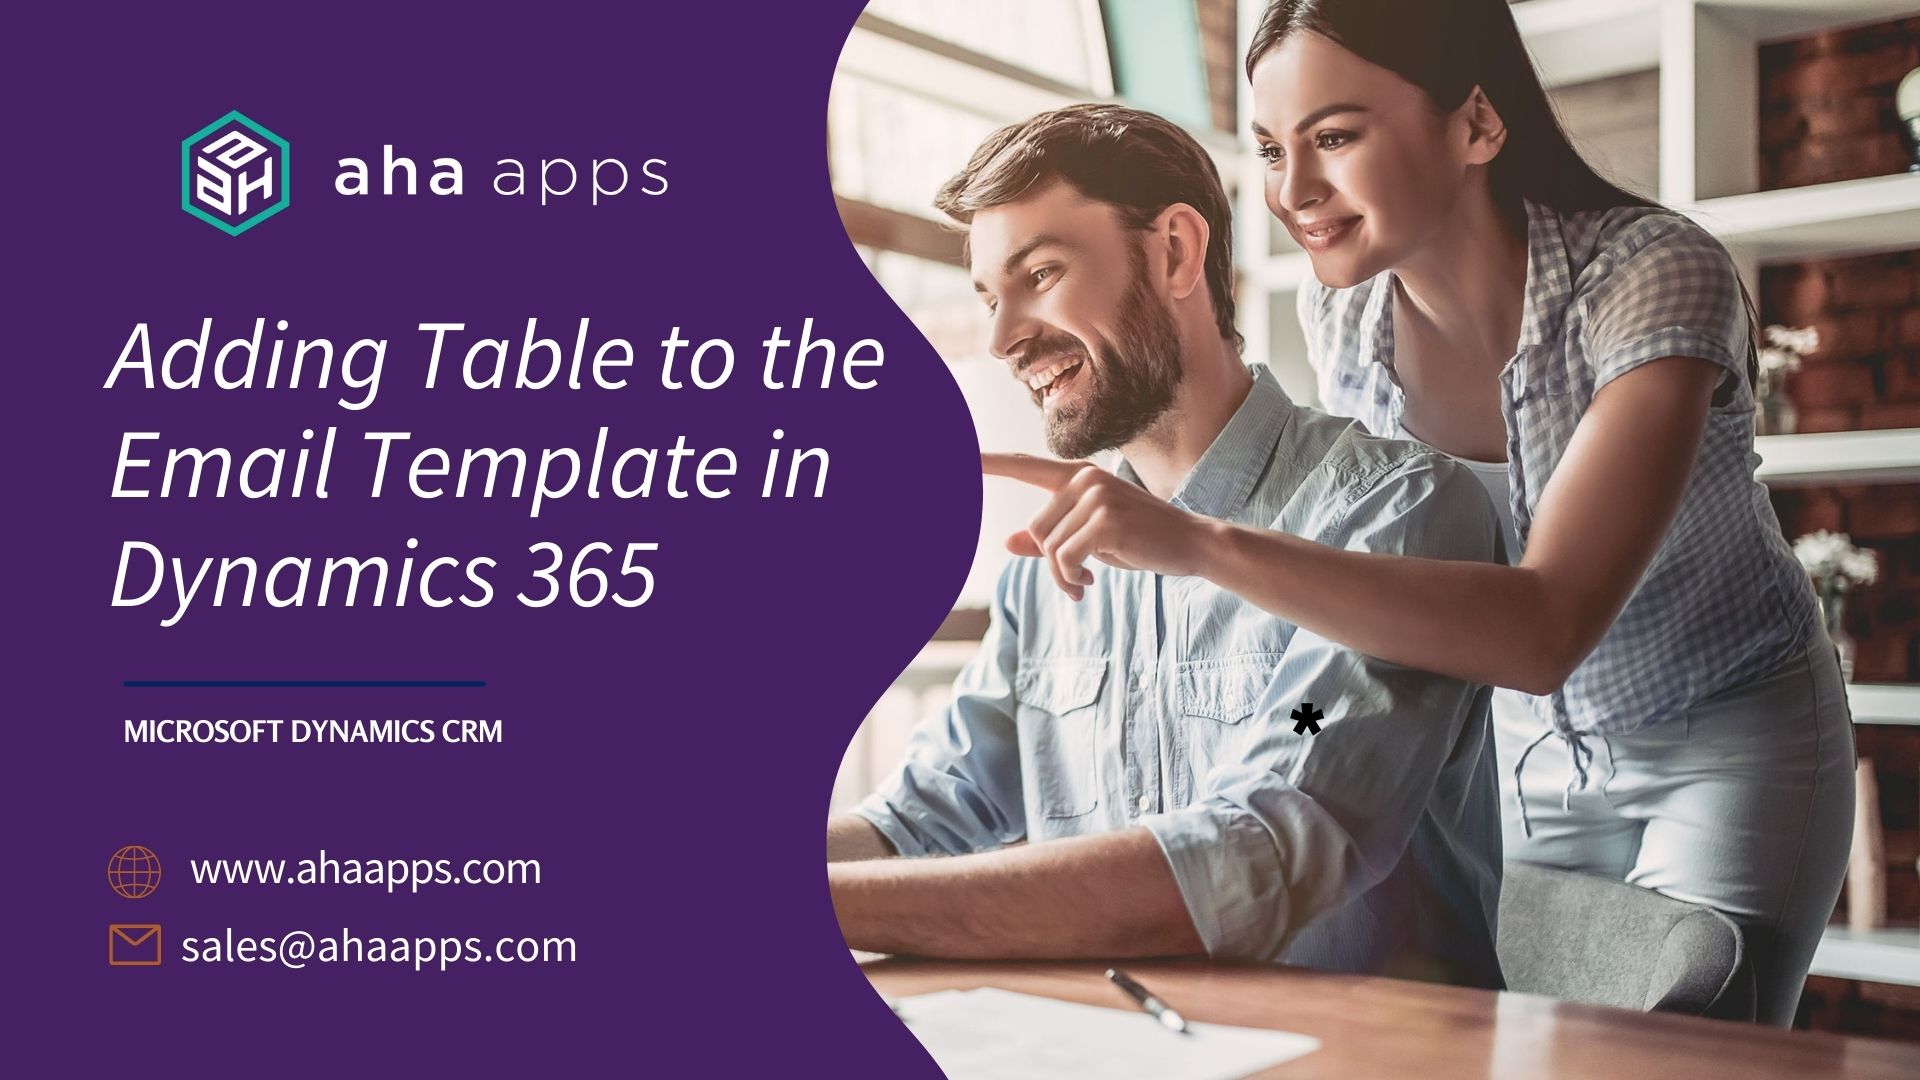 Adding Table to the Email Template in Dynamics CRM 365 - AhaApps